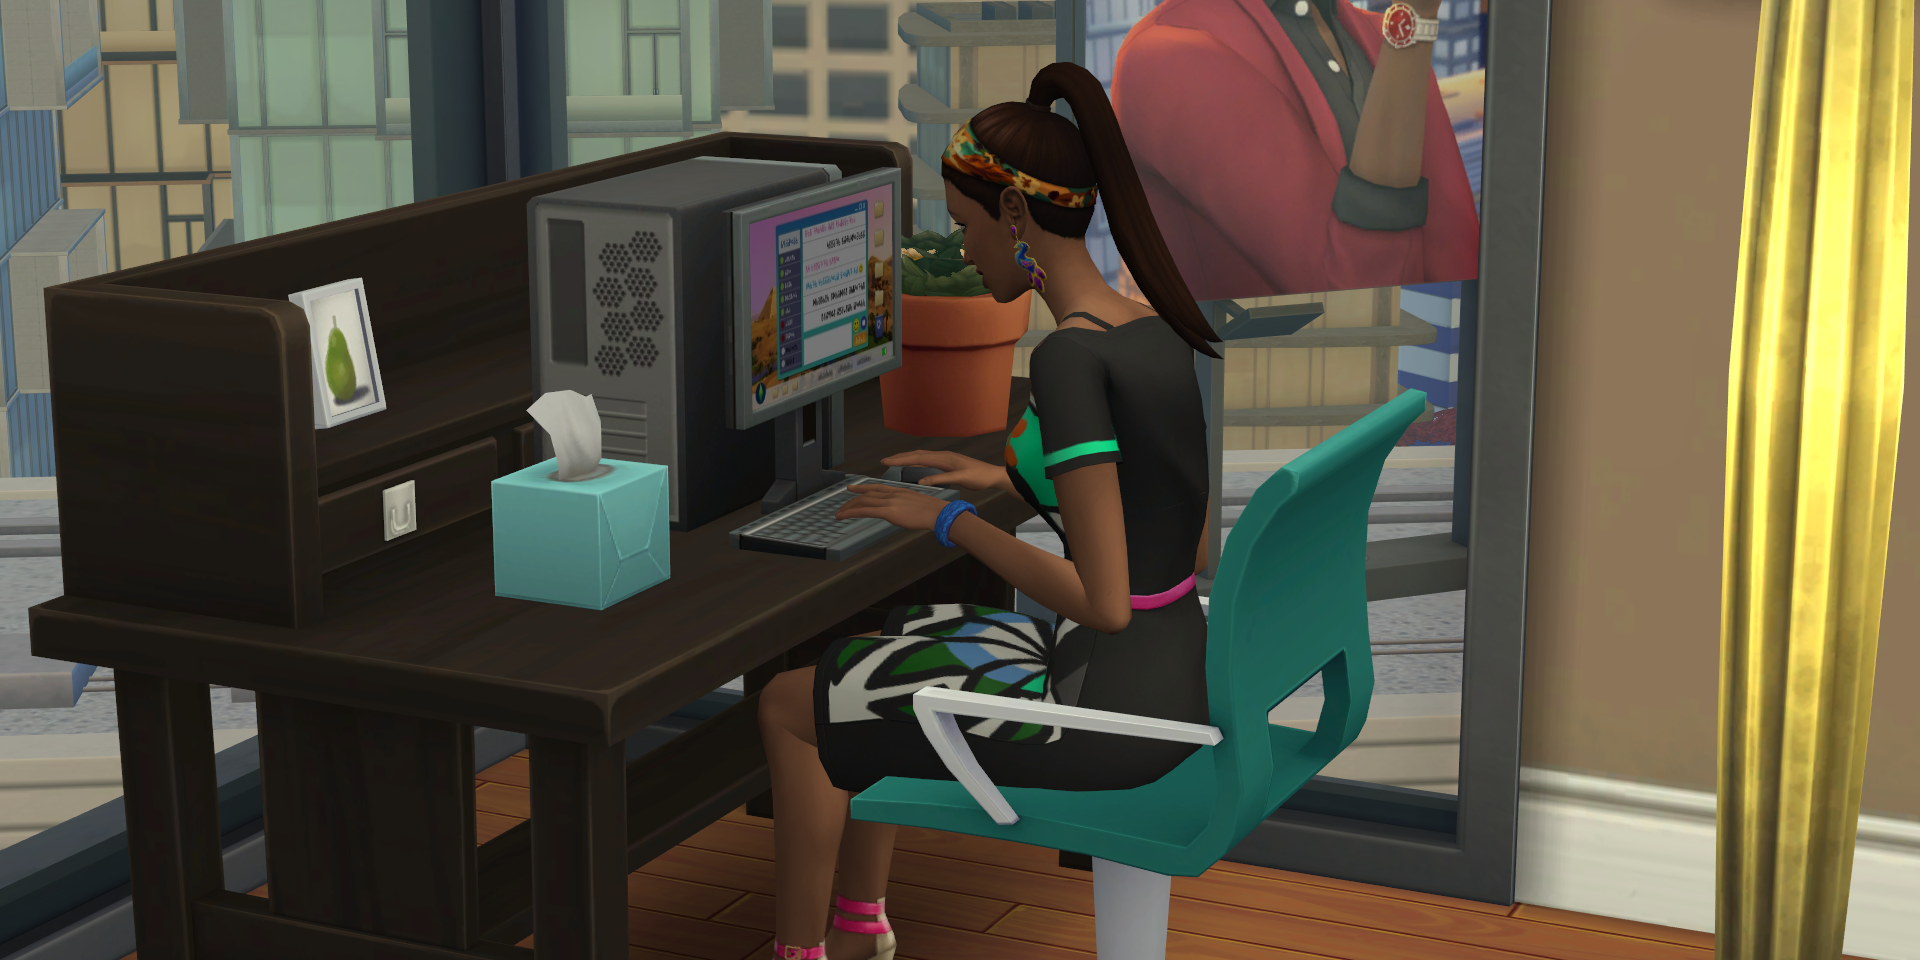 Sims 4's Penny Pizzaz using a computer